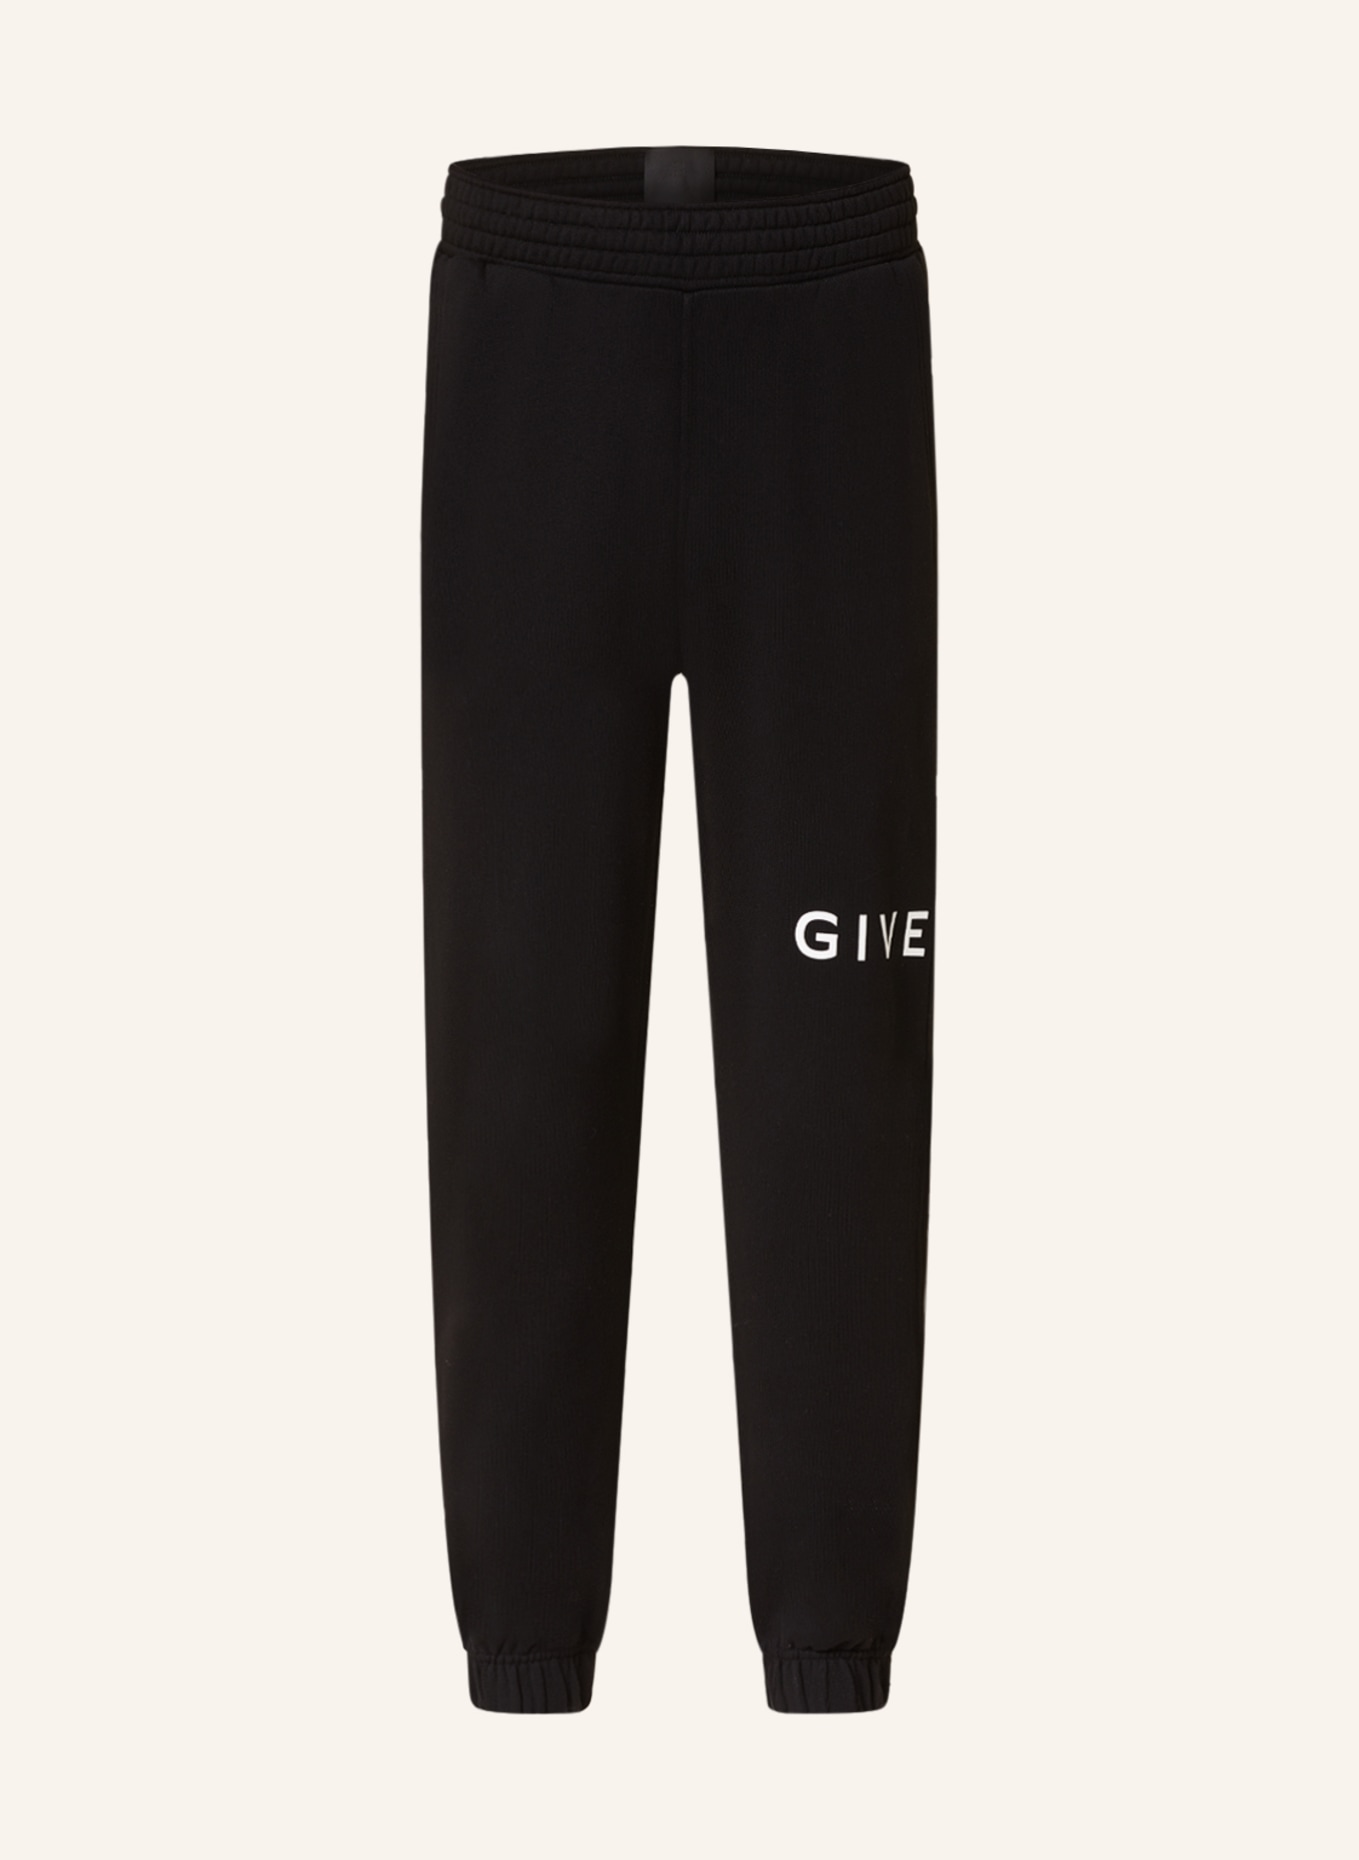 GIVENCHY Pants in jogger style